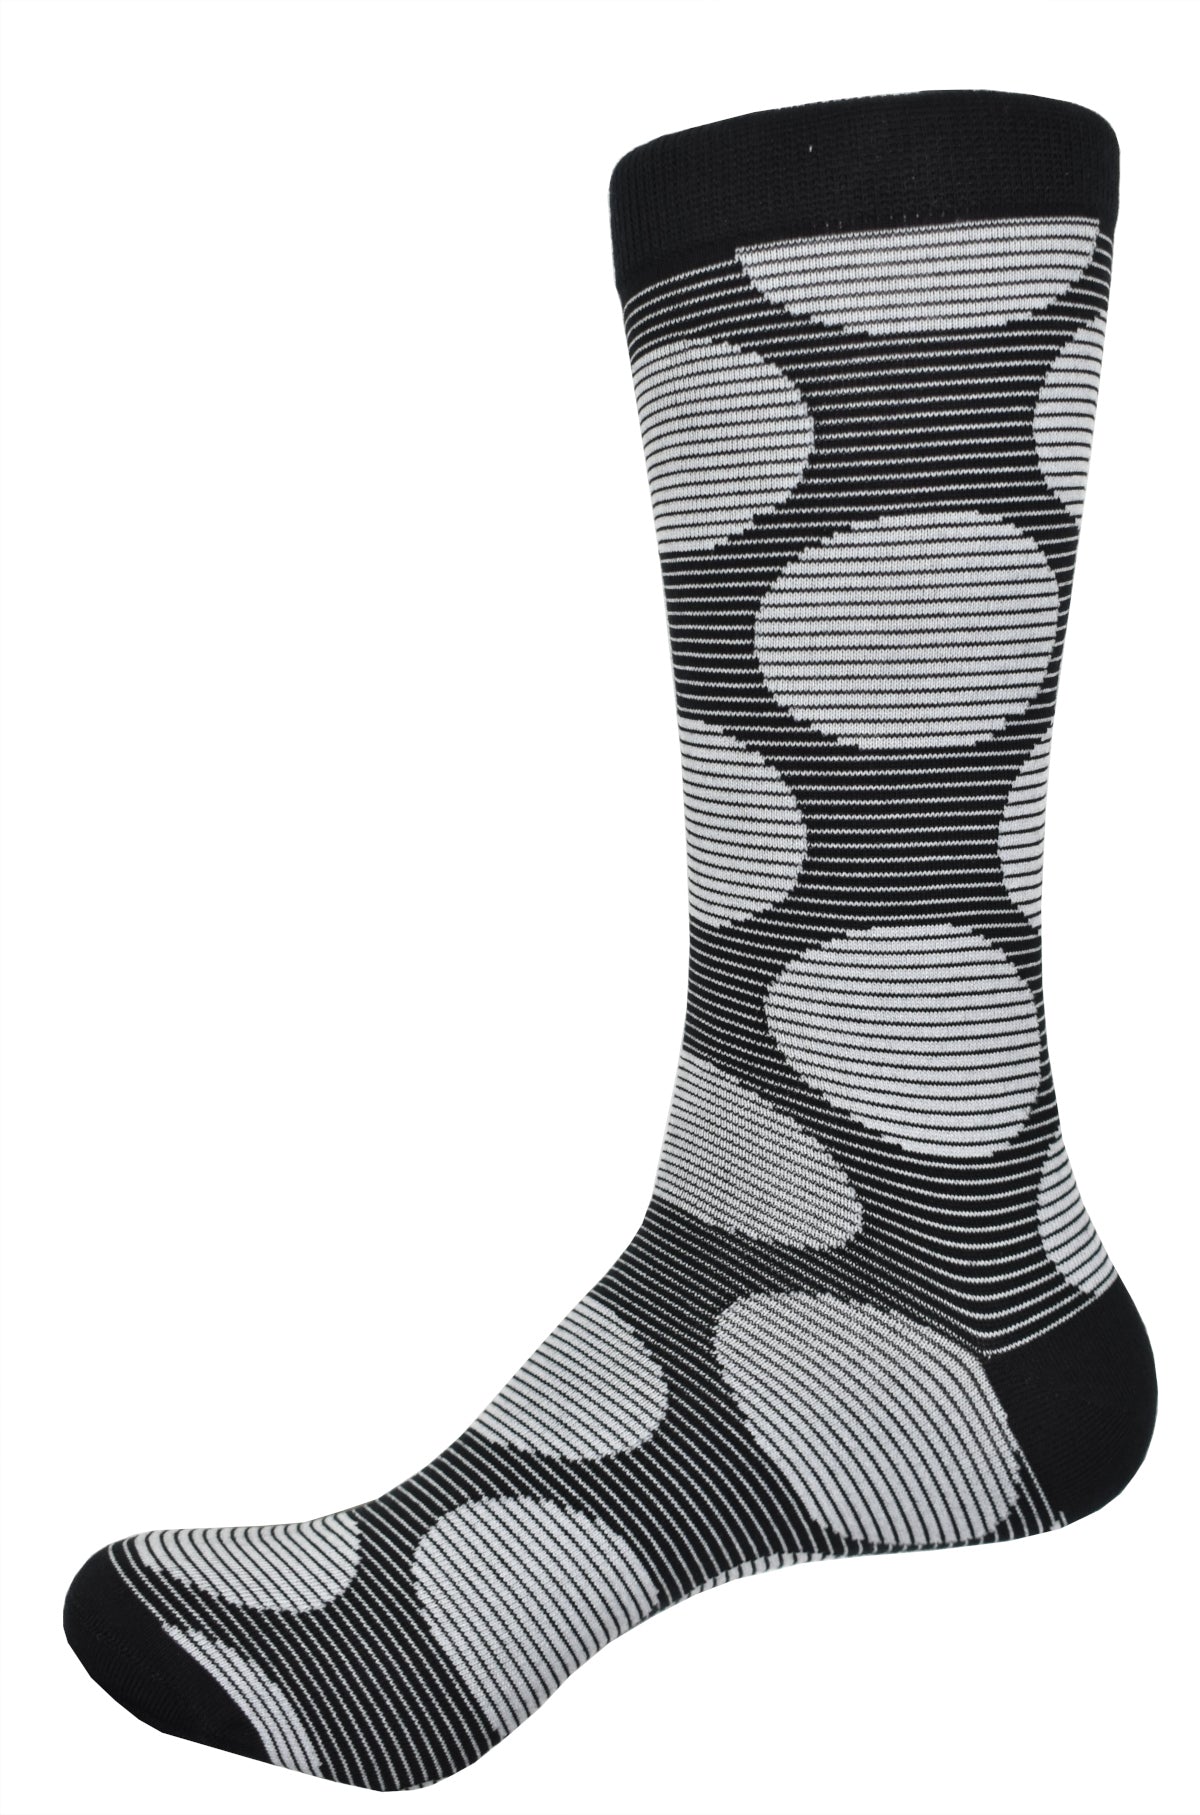 The ZV1567 Lined Circles offer all-day comfort and style. Mercerized cotton and lycra provides a luxuriously soft hand feel while the bold black and white pattern of circles and lines adds a modern touch to any ensemble. by Marcello Sport